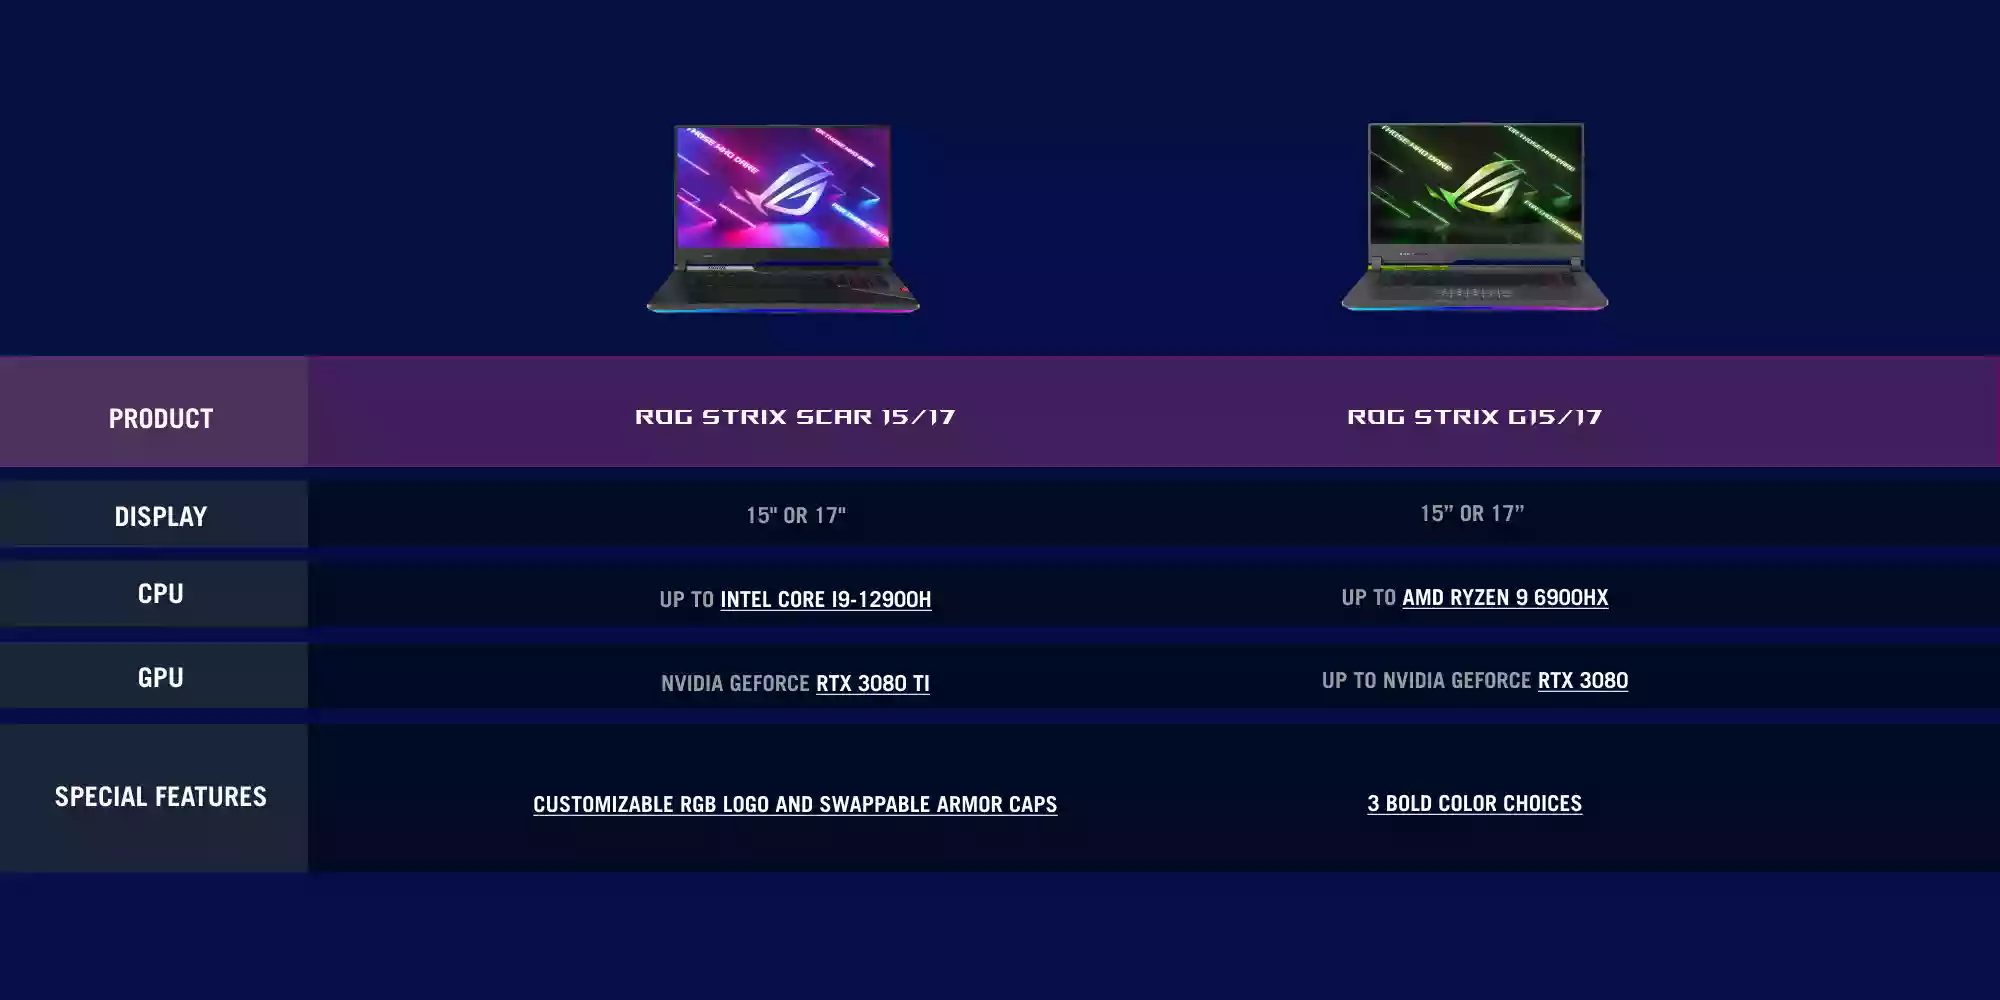 A table showing the differences between the ROG Strix SCAR and ROG Strix G series laptops.